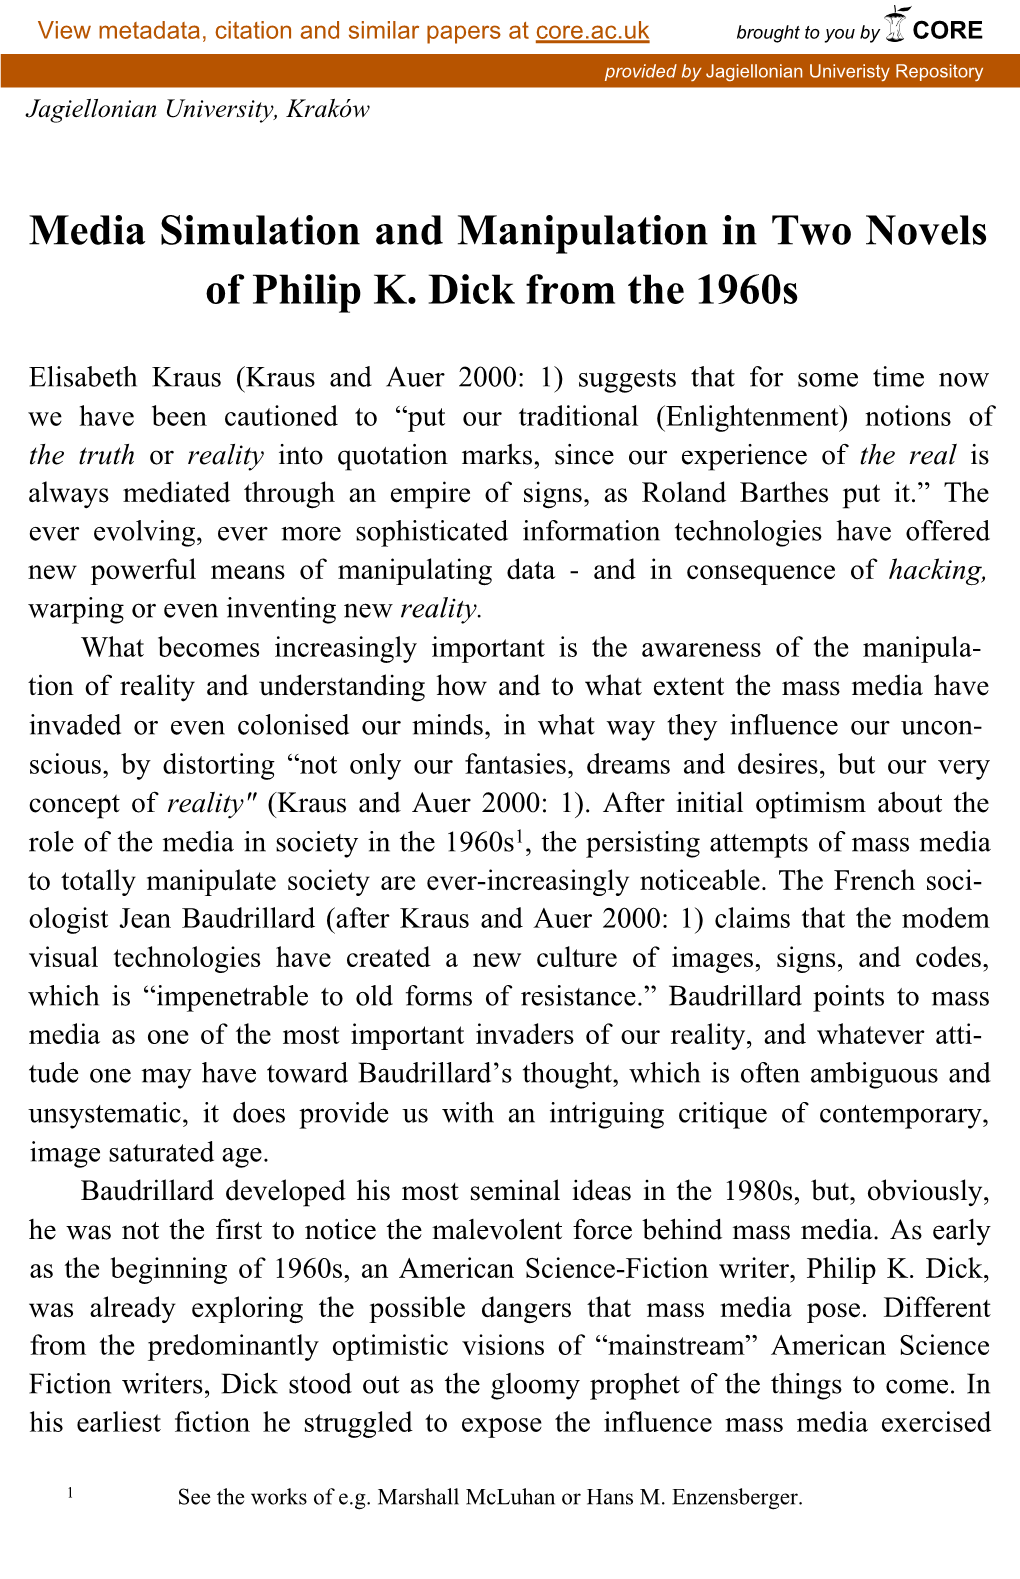 Media Simulation and Manipulation in Two Novels of Philip K. Dick from the 1960S